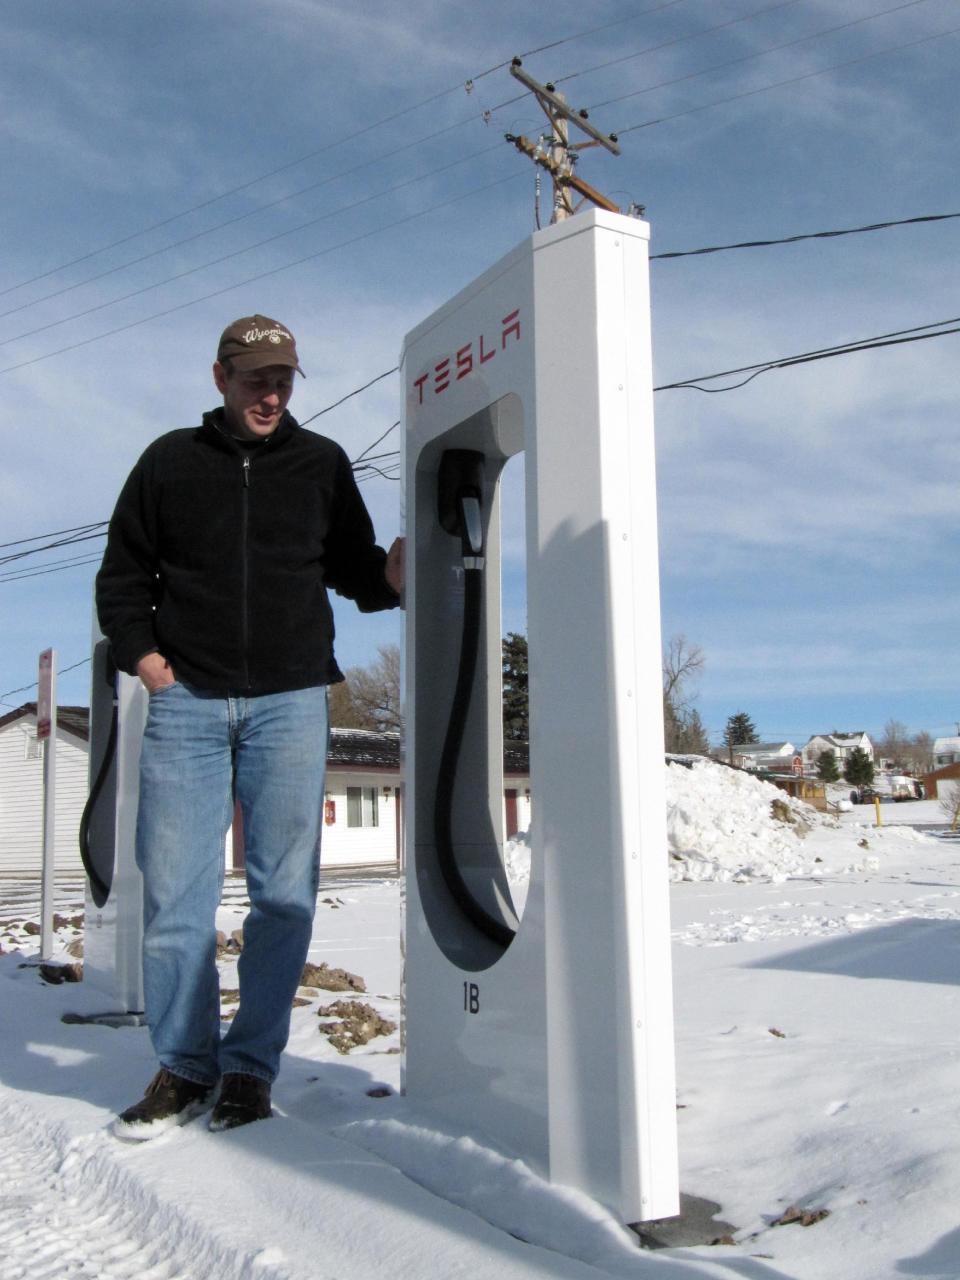 In this Jan. 2, 2014 photo, Mark Kupke, owner of the Covered Wagon Motel in Lusk, Wyo., stands next to one of four Tesla Supercharger units installed in December in the hotel courtyard. A Supercharger can recharge a Tesla's depleted battery pack to a 90-percent level within 45-50 minutes, several times faster than any other charging option for the electric cars. Lusk is on the route of Tesla's first network of coast-to-coast Supercharger stations. The quick-charge stations promise to make cross-country travel by Tesla much quicker and easier. (AP Photo/Mead Gruver)